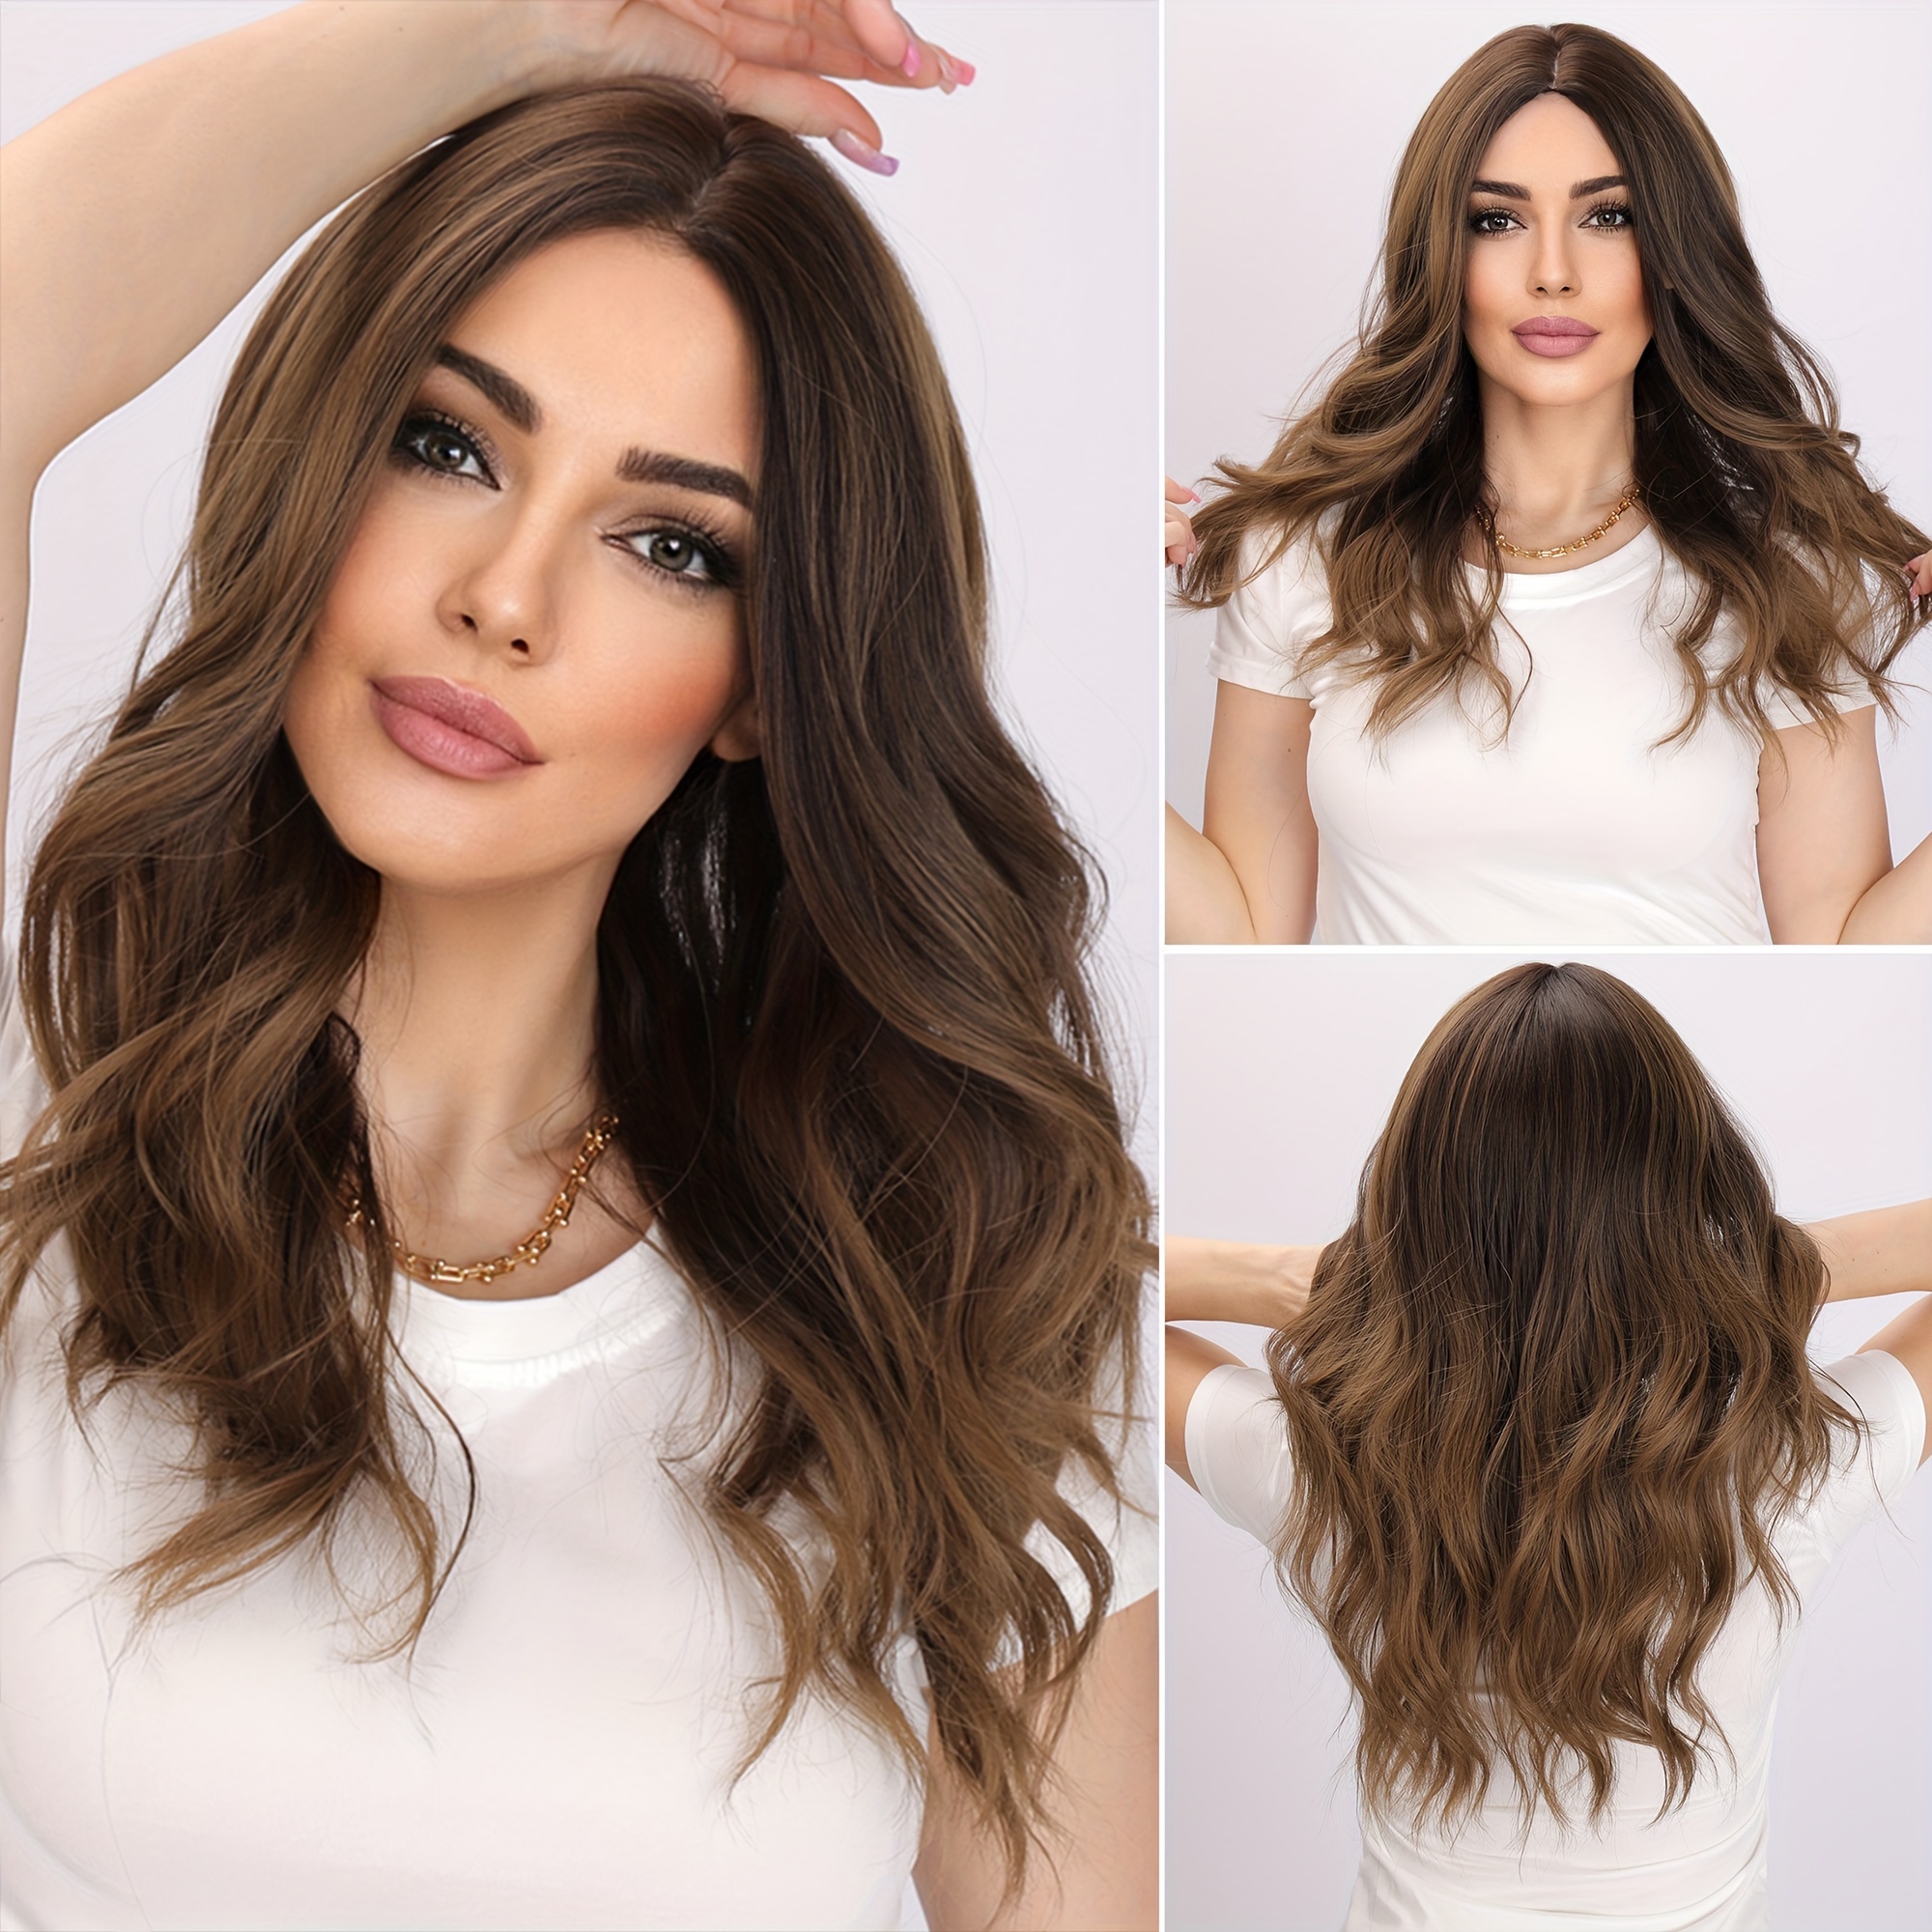 

New Brown Wig - Women's Natural Synthetic Synthetic Synthetic Wig - Realistic Wig -22 Inch Fashionable Ideal Choice For Women And Girls, Heat-resistant, Suitable For Daily Wear And Parties